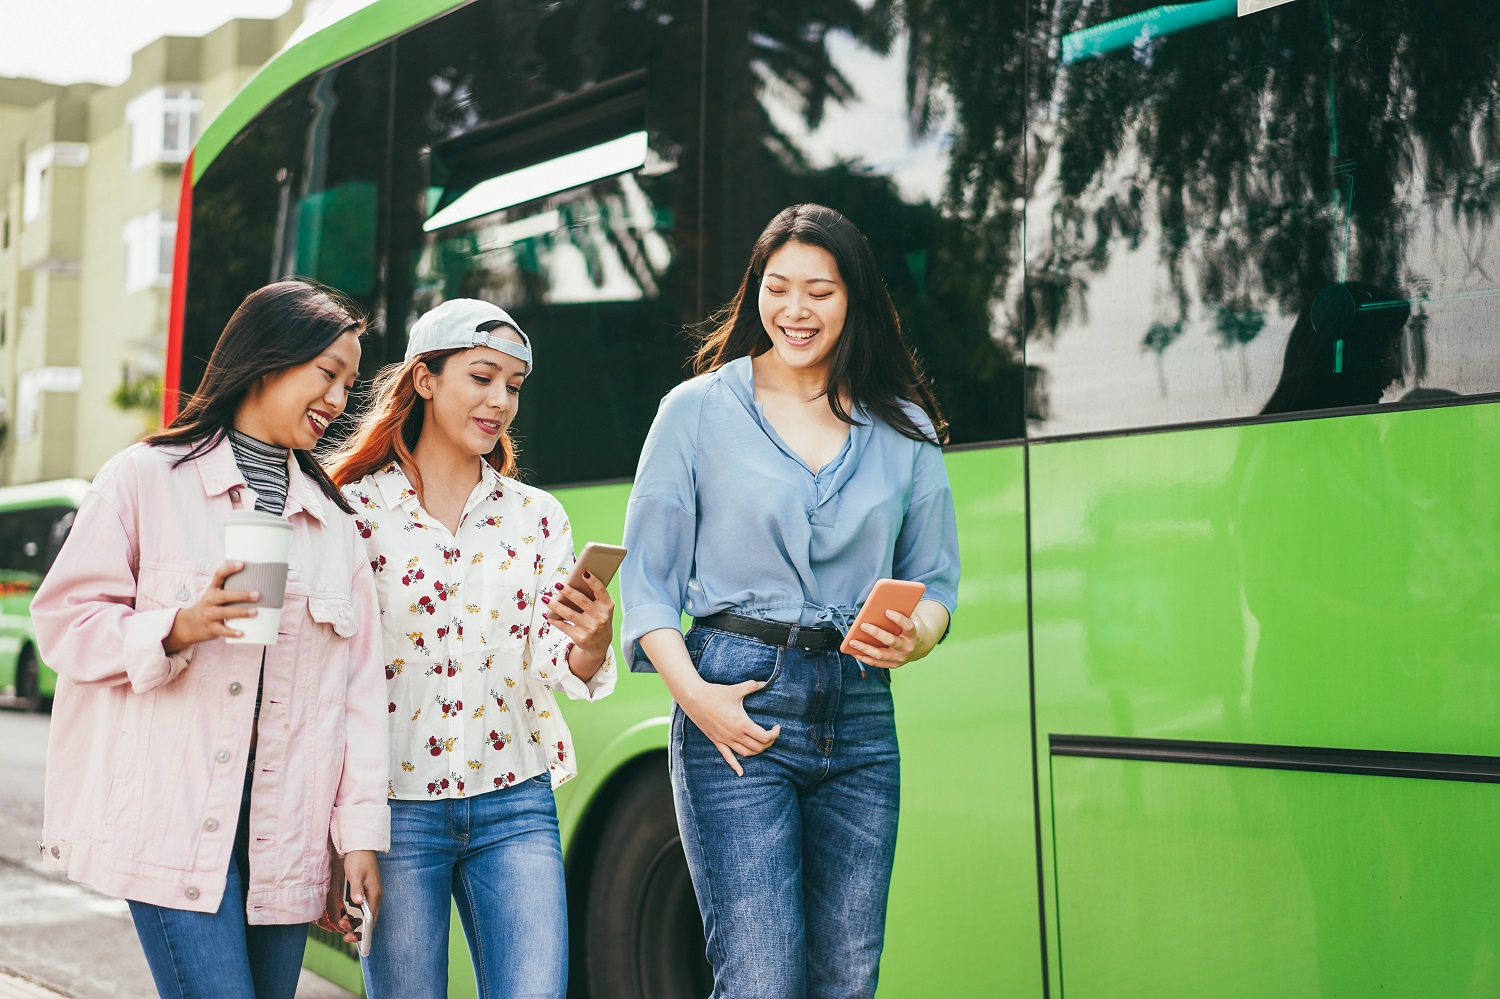 Three young women look at their mobile phones as they walk past a bus.